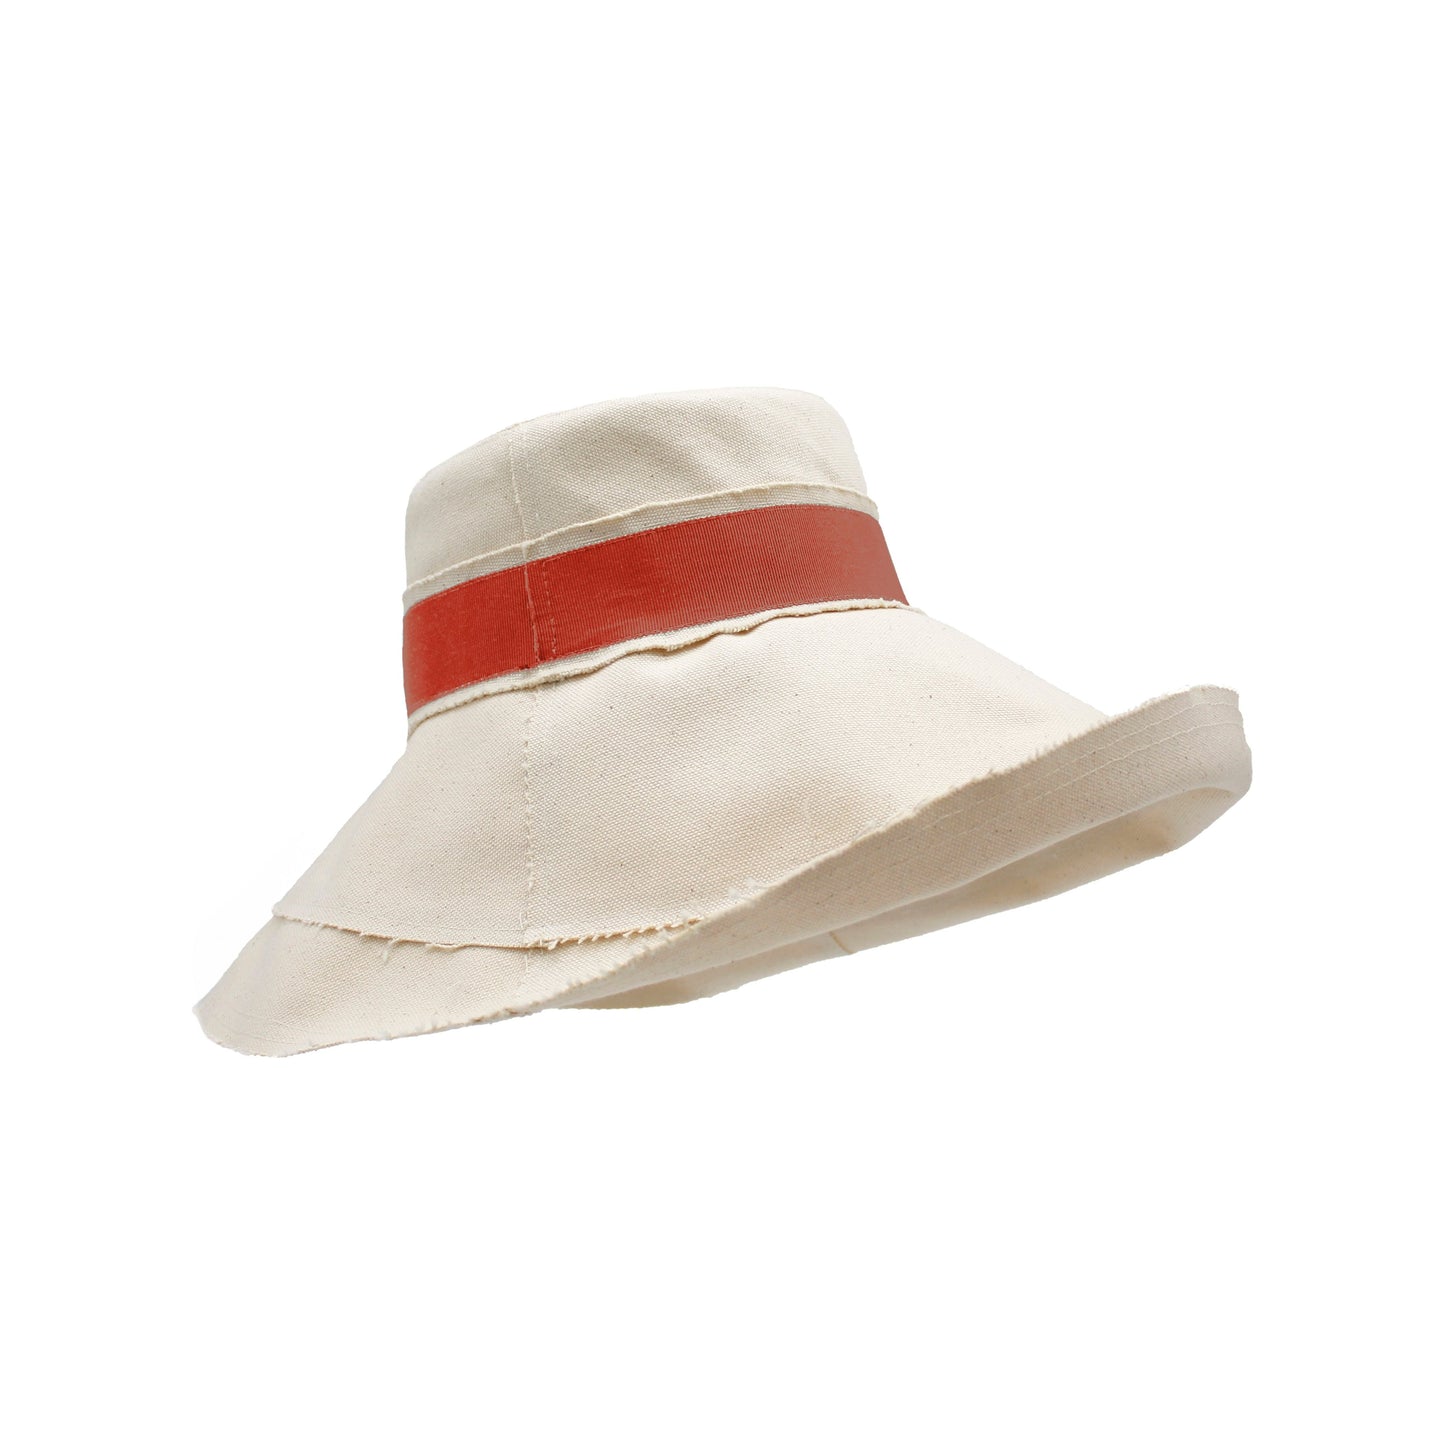 White Dia, Natural / Terracotta canvas hat with a red band isolated on a white background by Lola Hats.